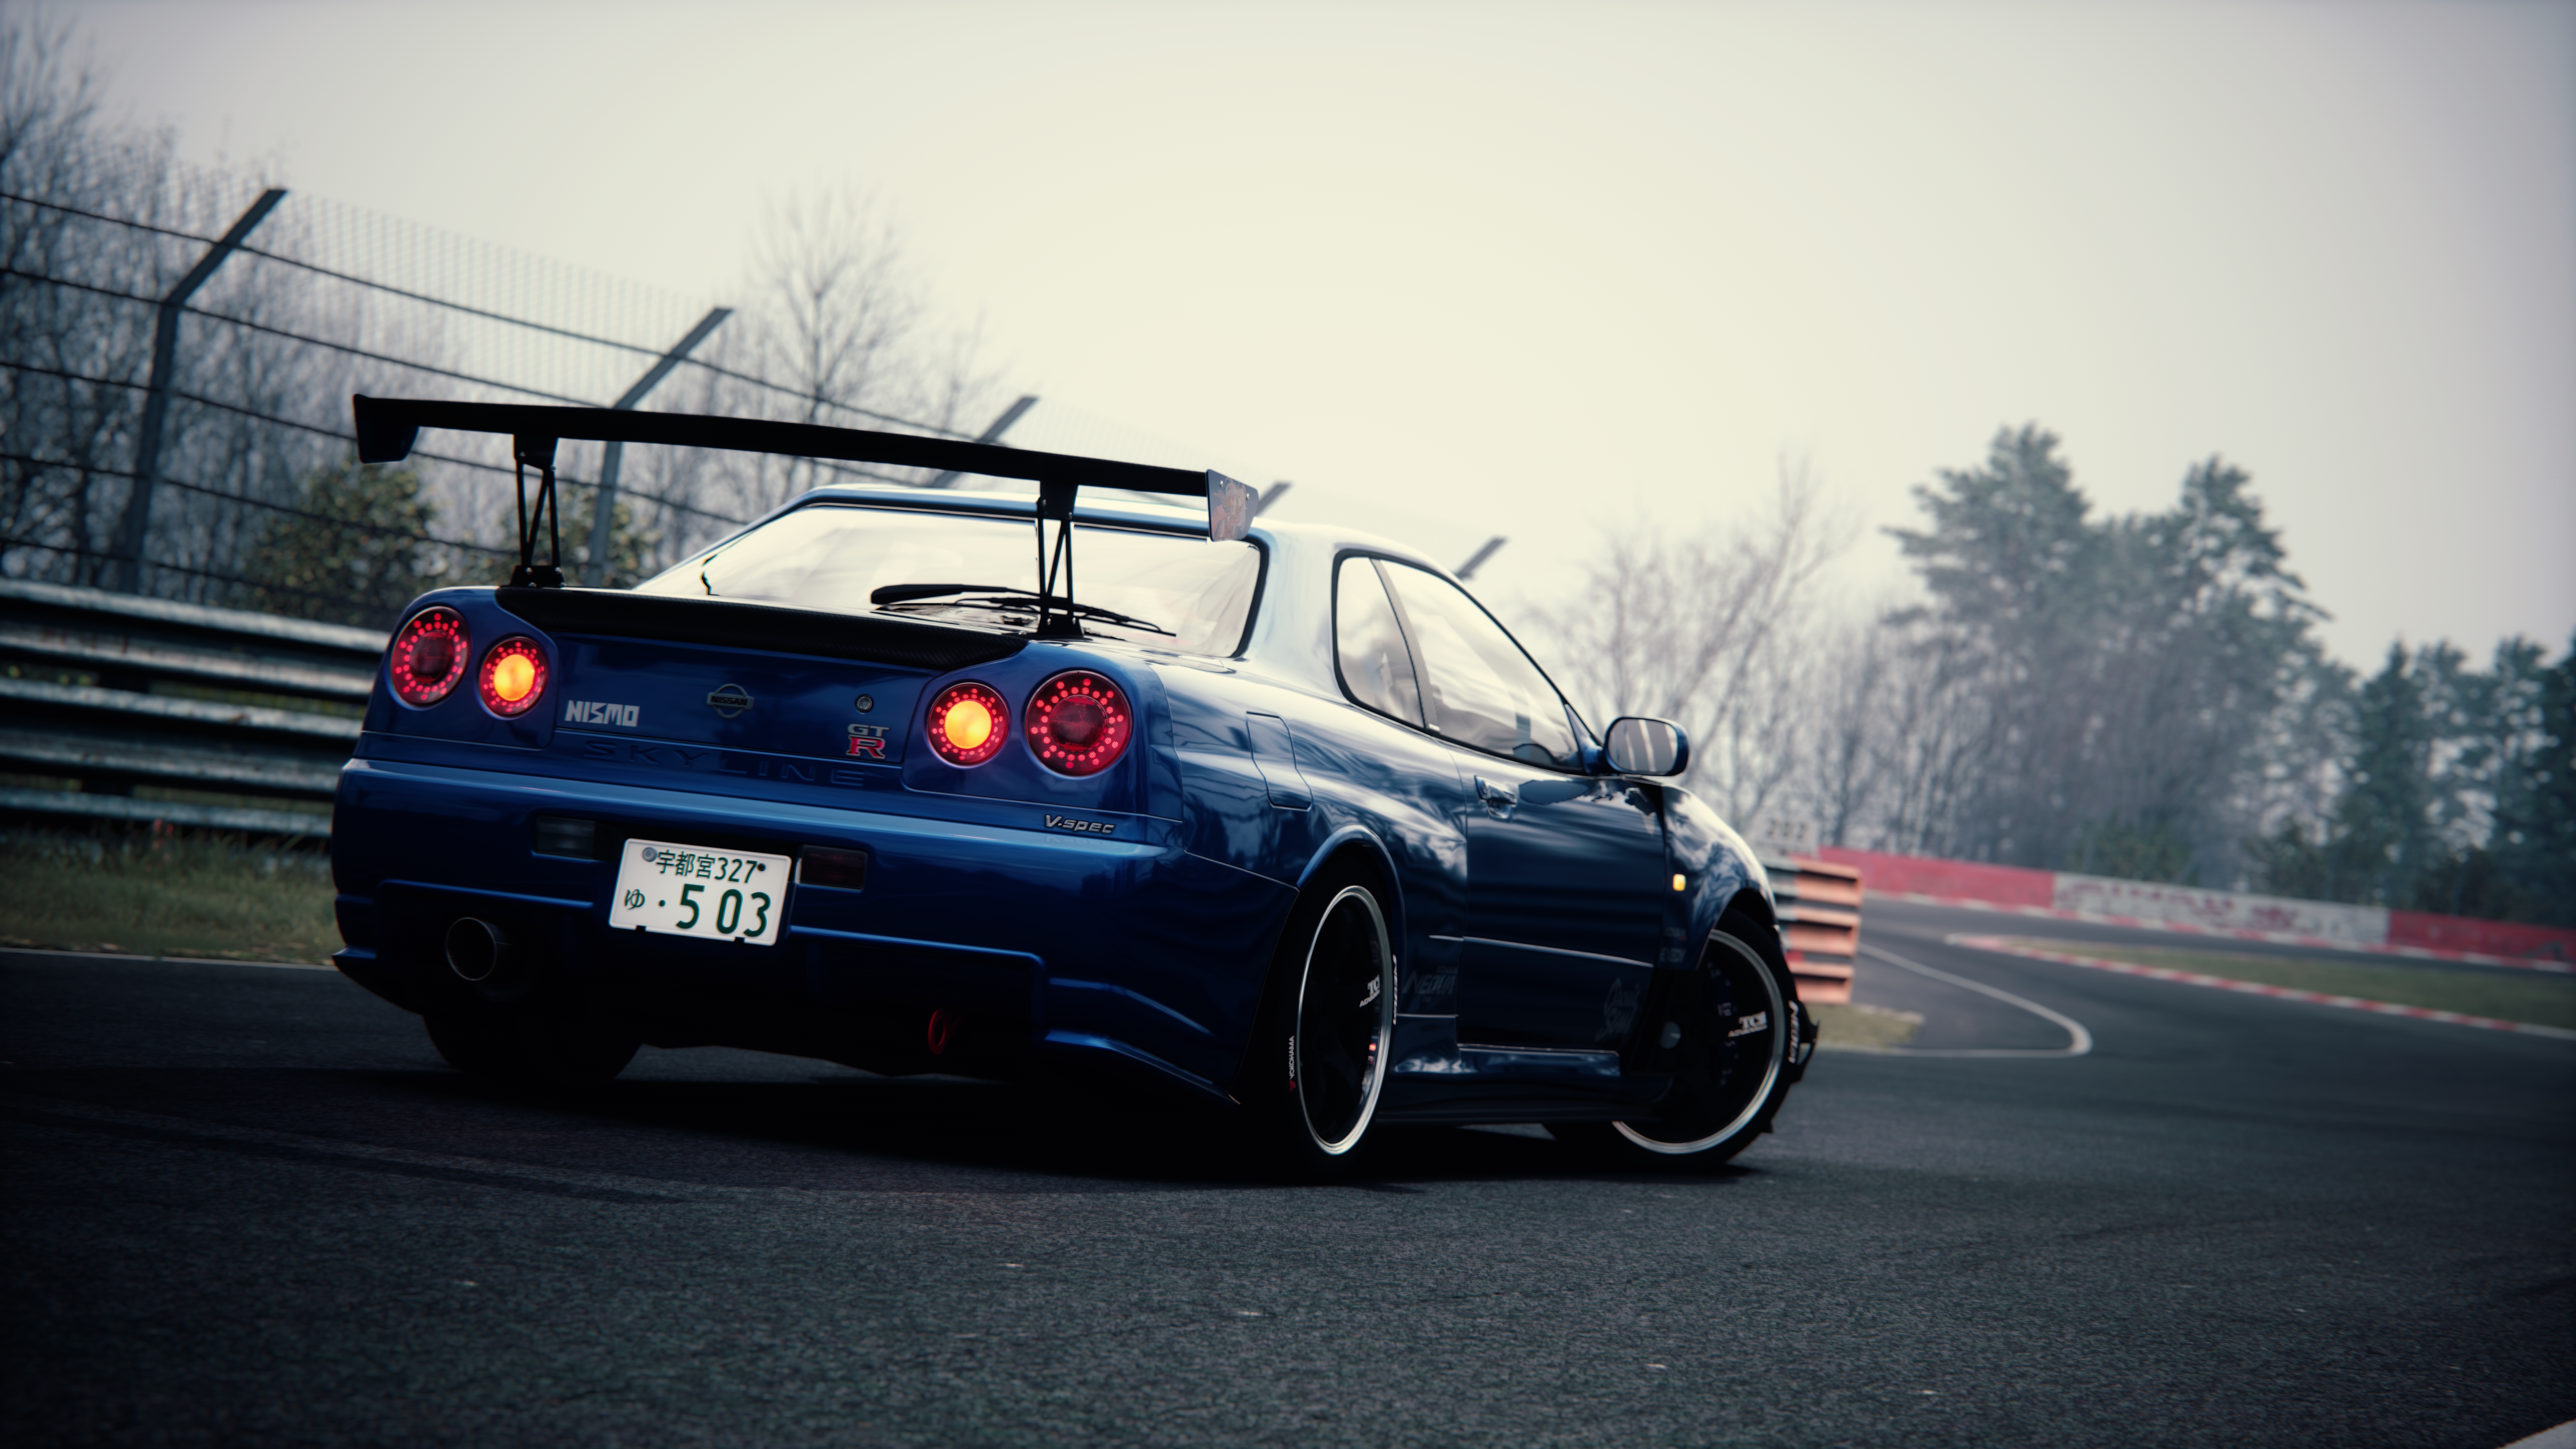 General 7680x4320 Nissan Skyline R34 car Assetto Corsa PC gaming rear view licence plates taillights driving trees vehicle kanji video game art screen shot video games fence